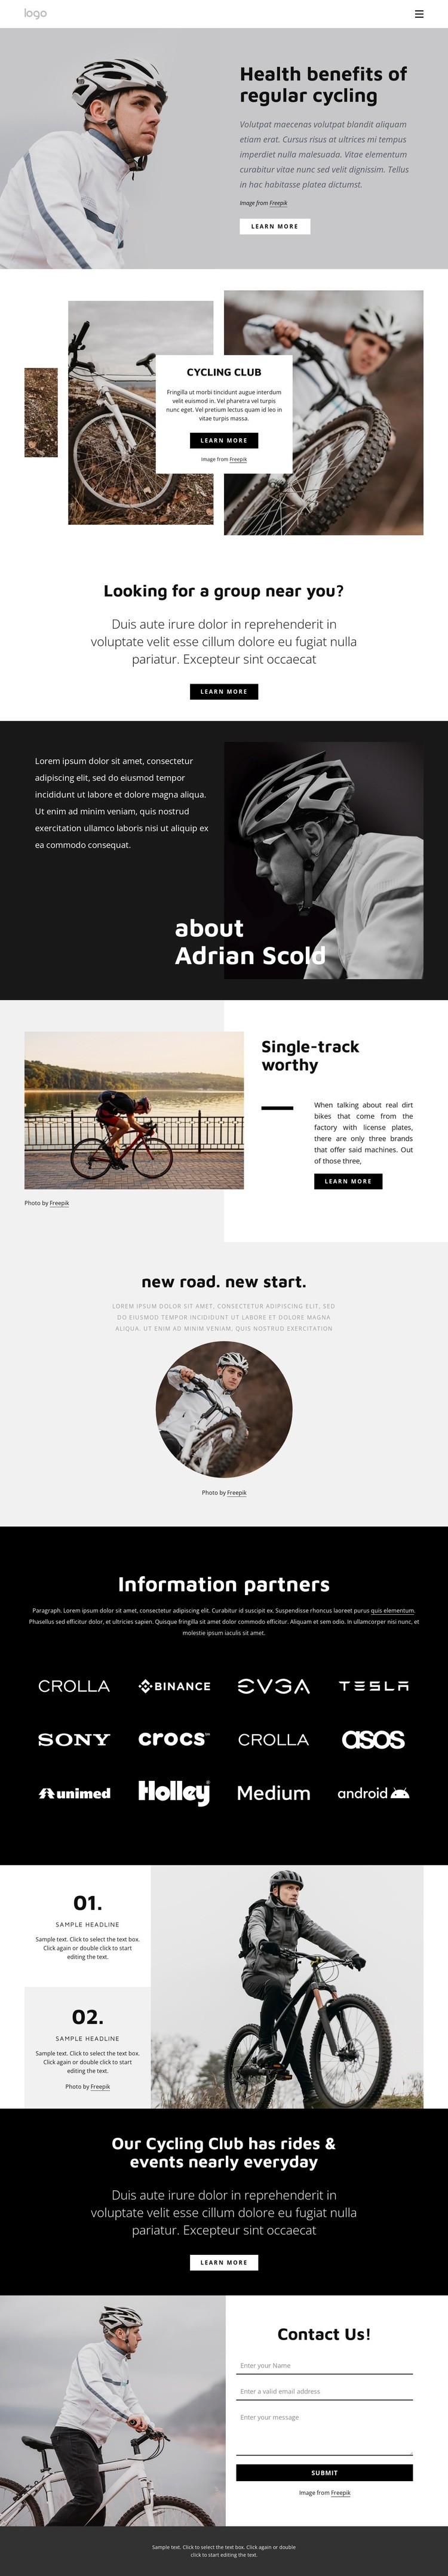 Benefits of regular cycling Homepage Design